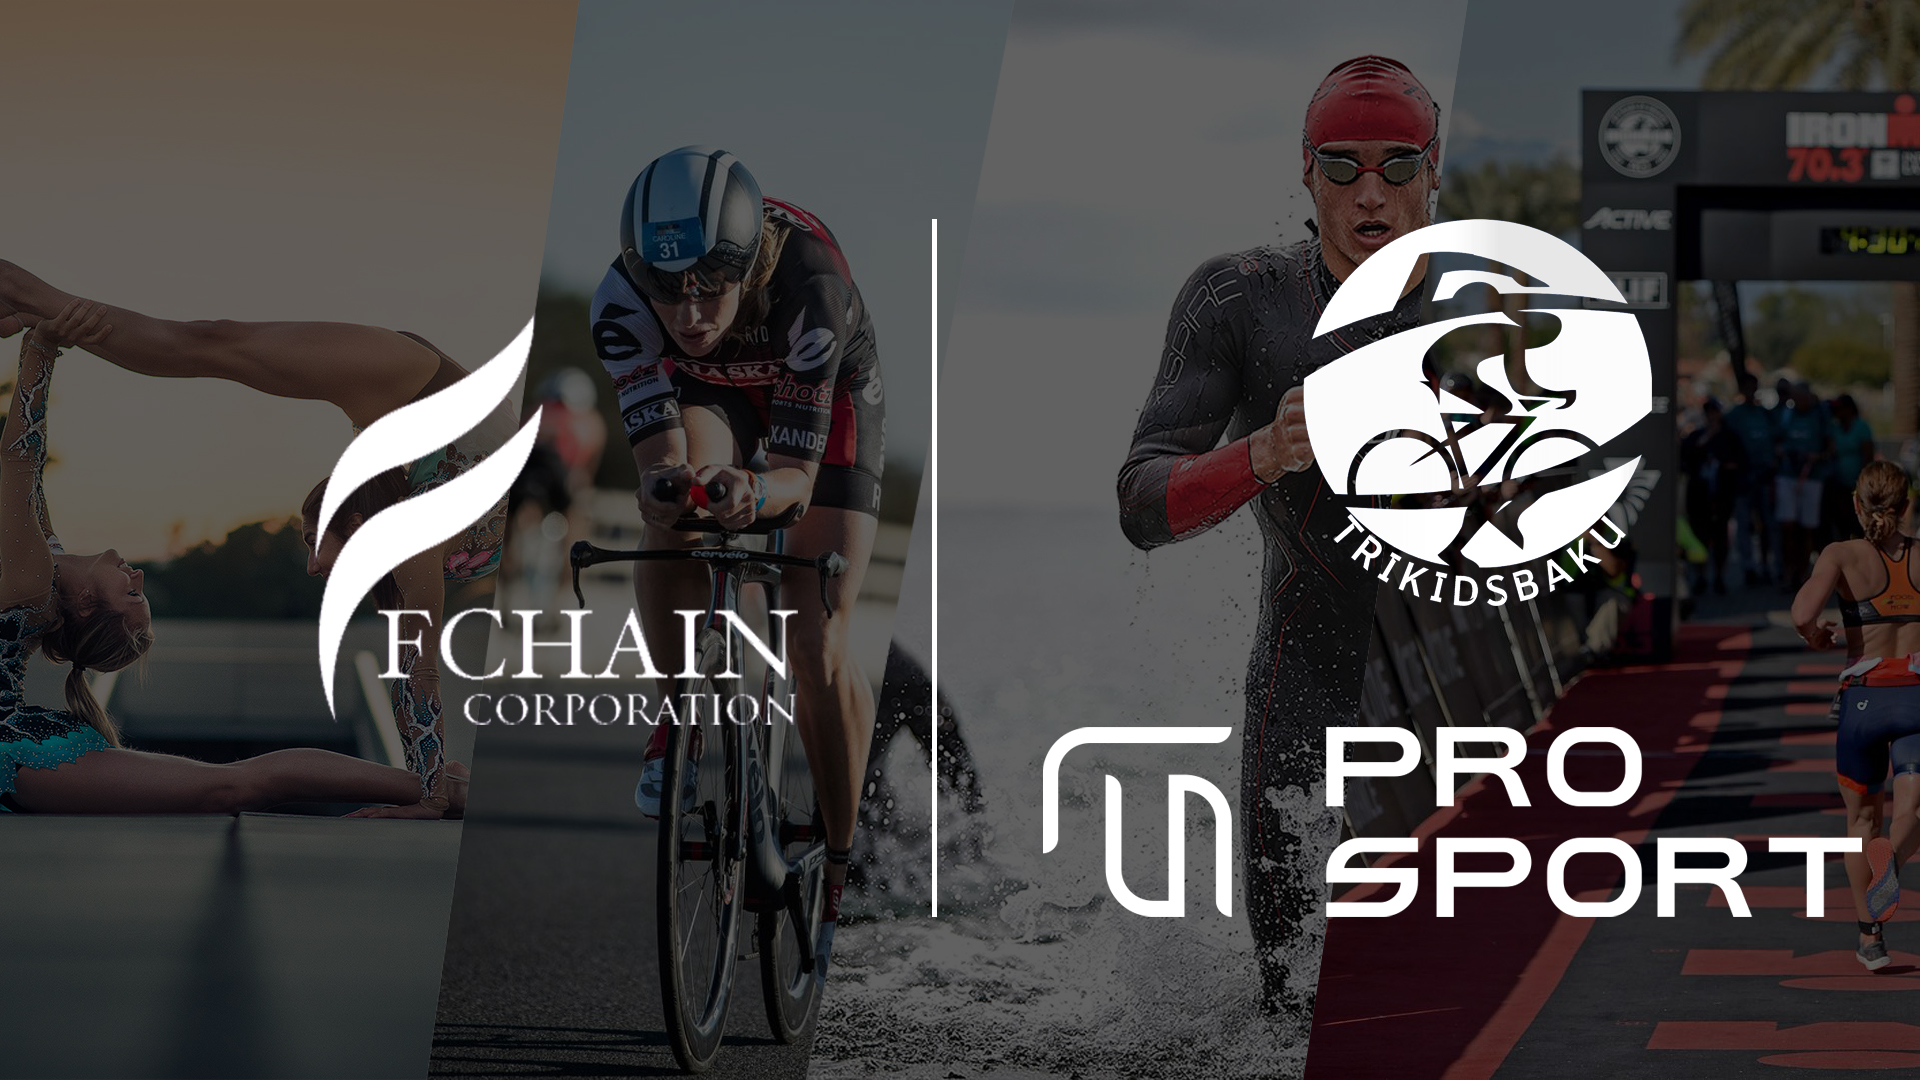 A Sponsorship Agreement is to be signed between FCHAIN and the Triathlon School “Trikids Baku”